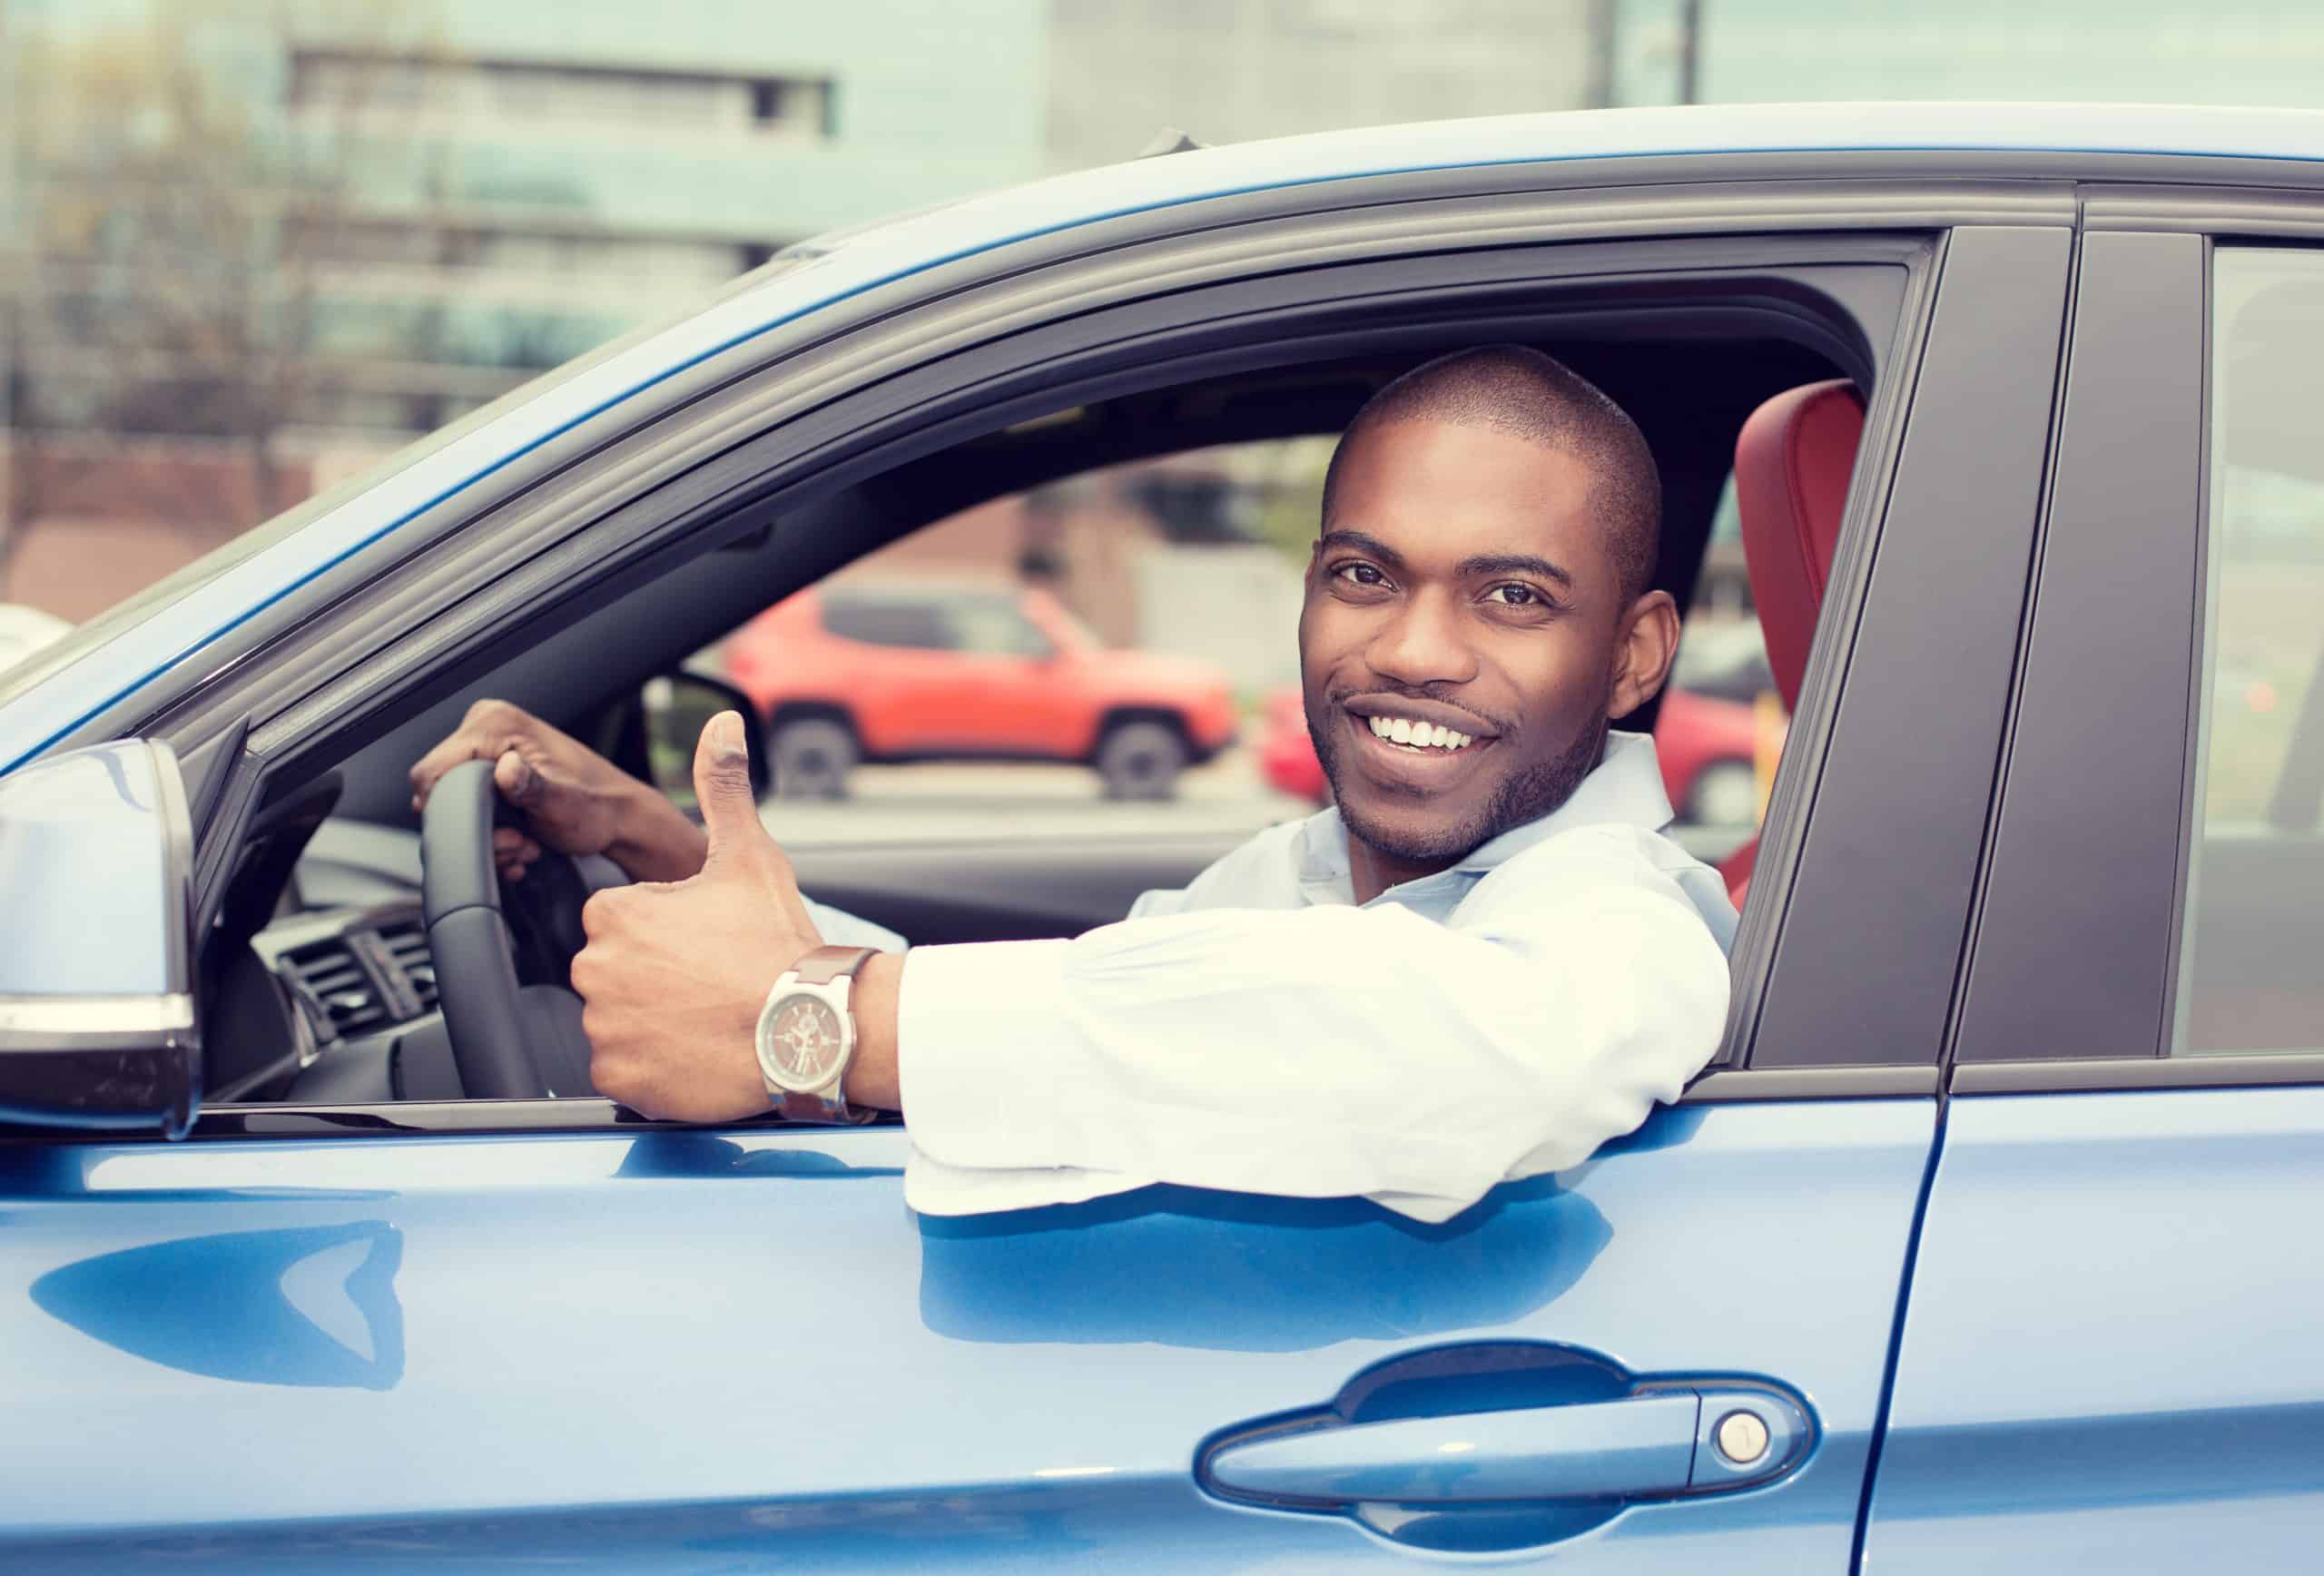 Save money on gas - Black man in blue car giving thumbs up